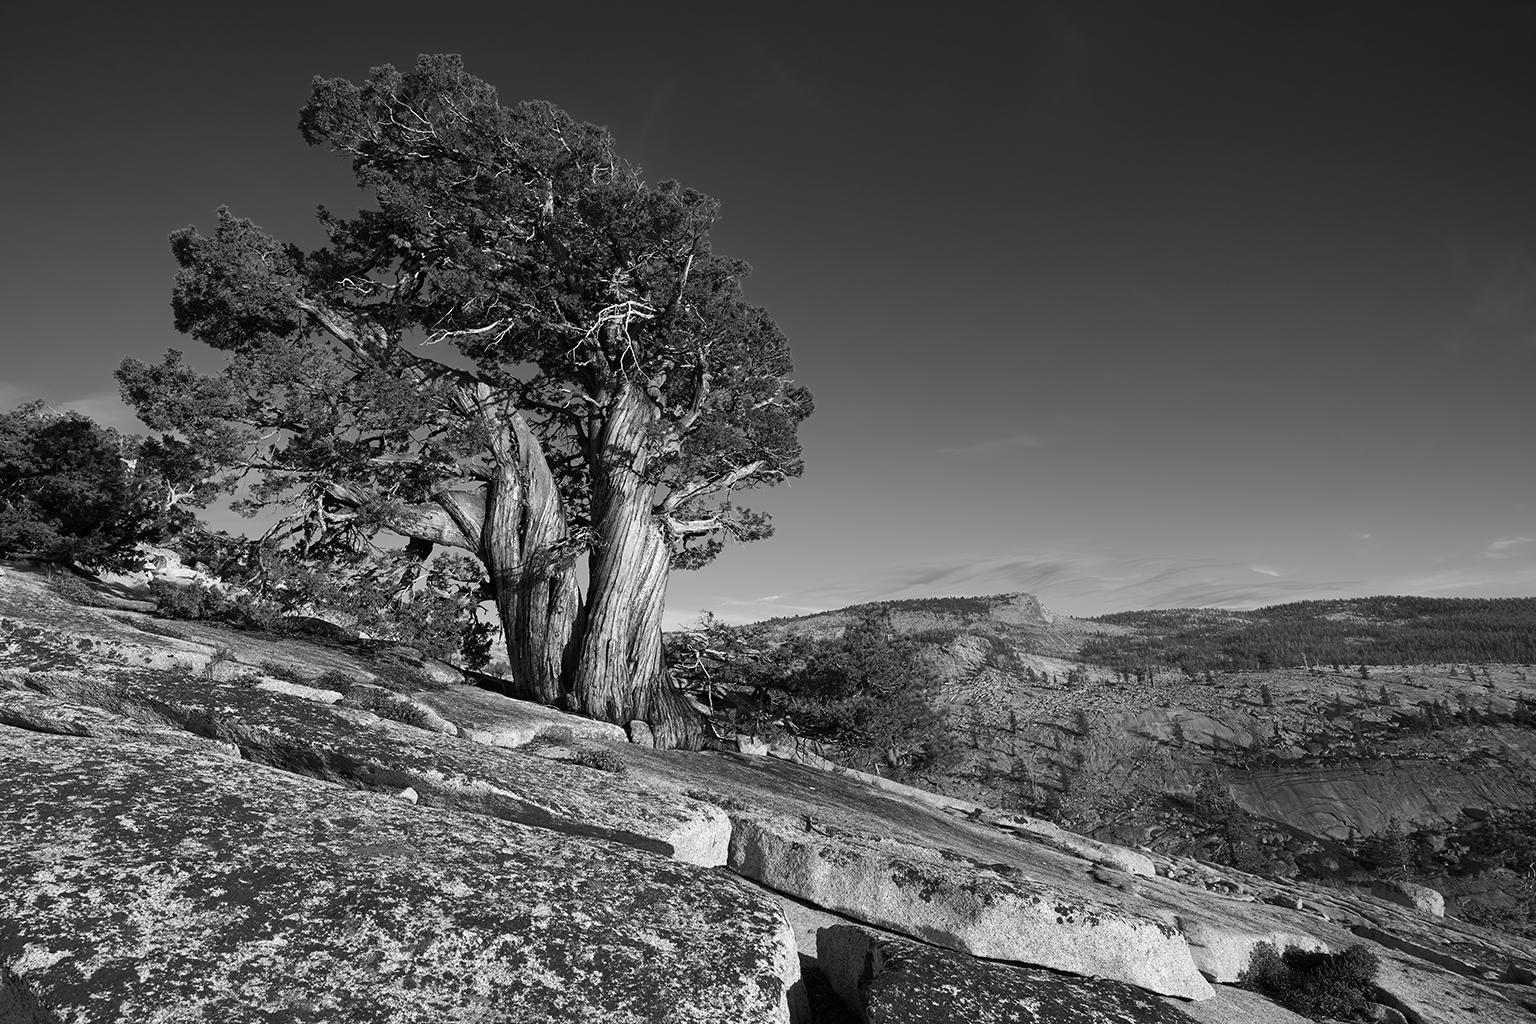 Tree Study II - large format b/w photograph of lone ancient tree in landscape